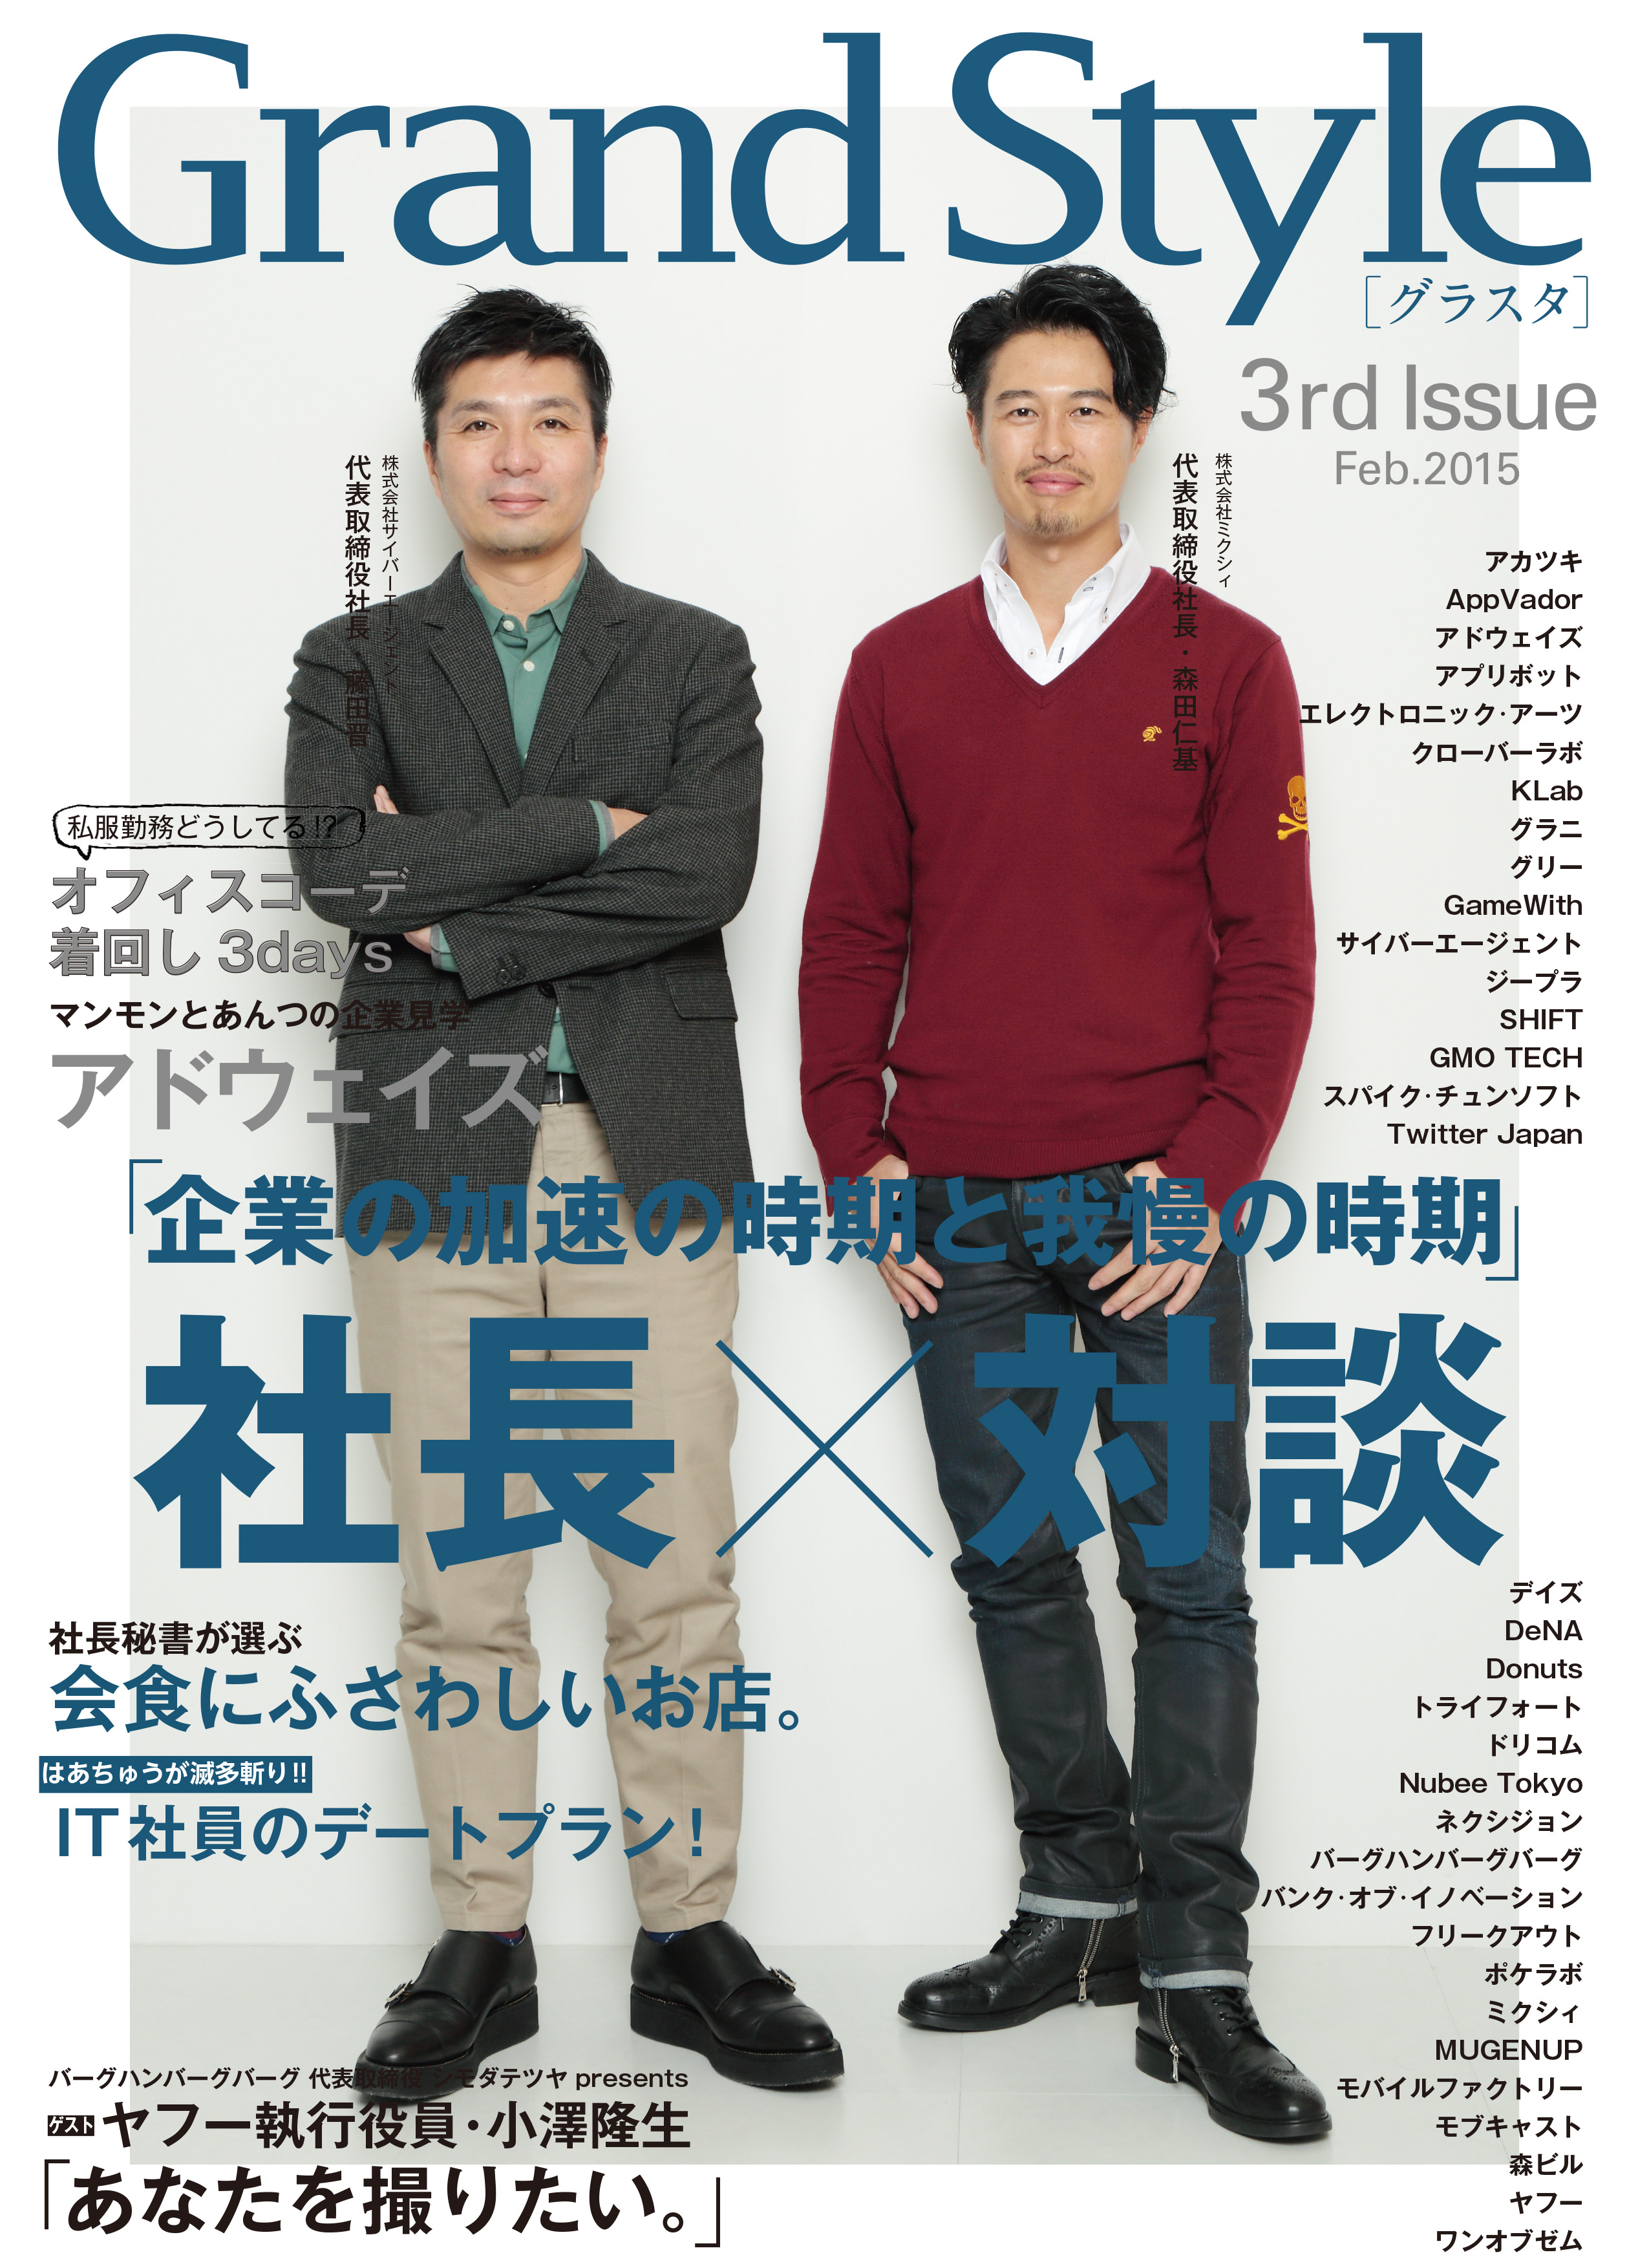 『Grand Style』3rd Issue